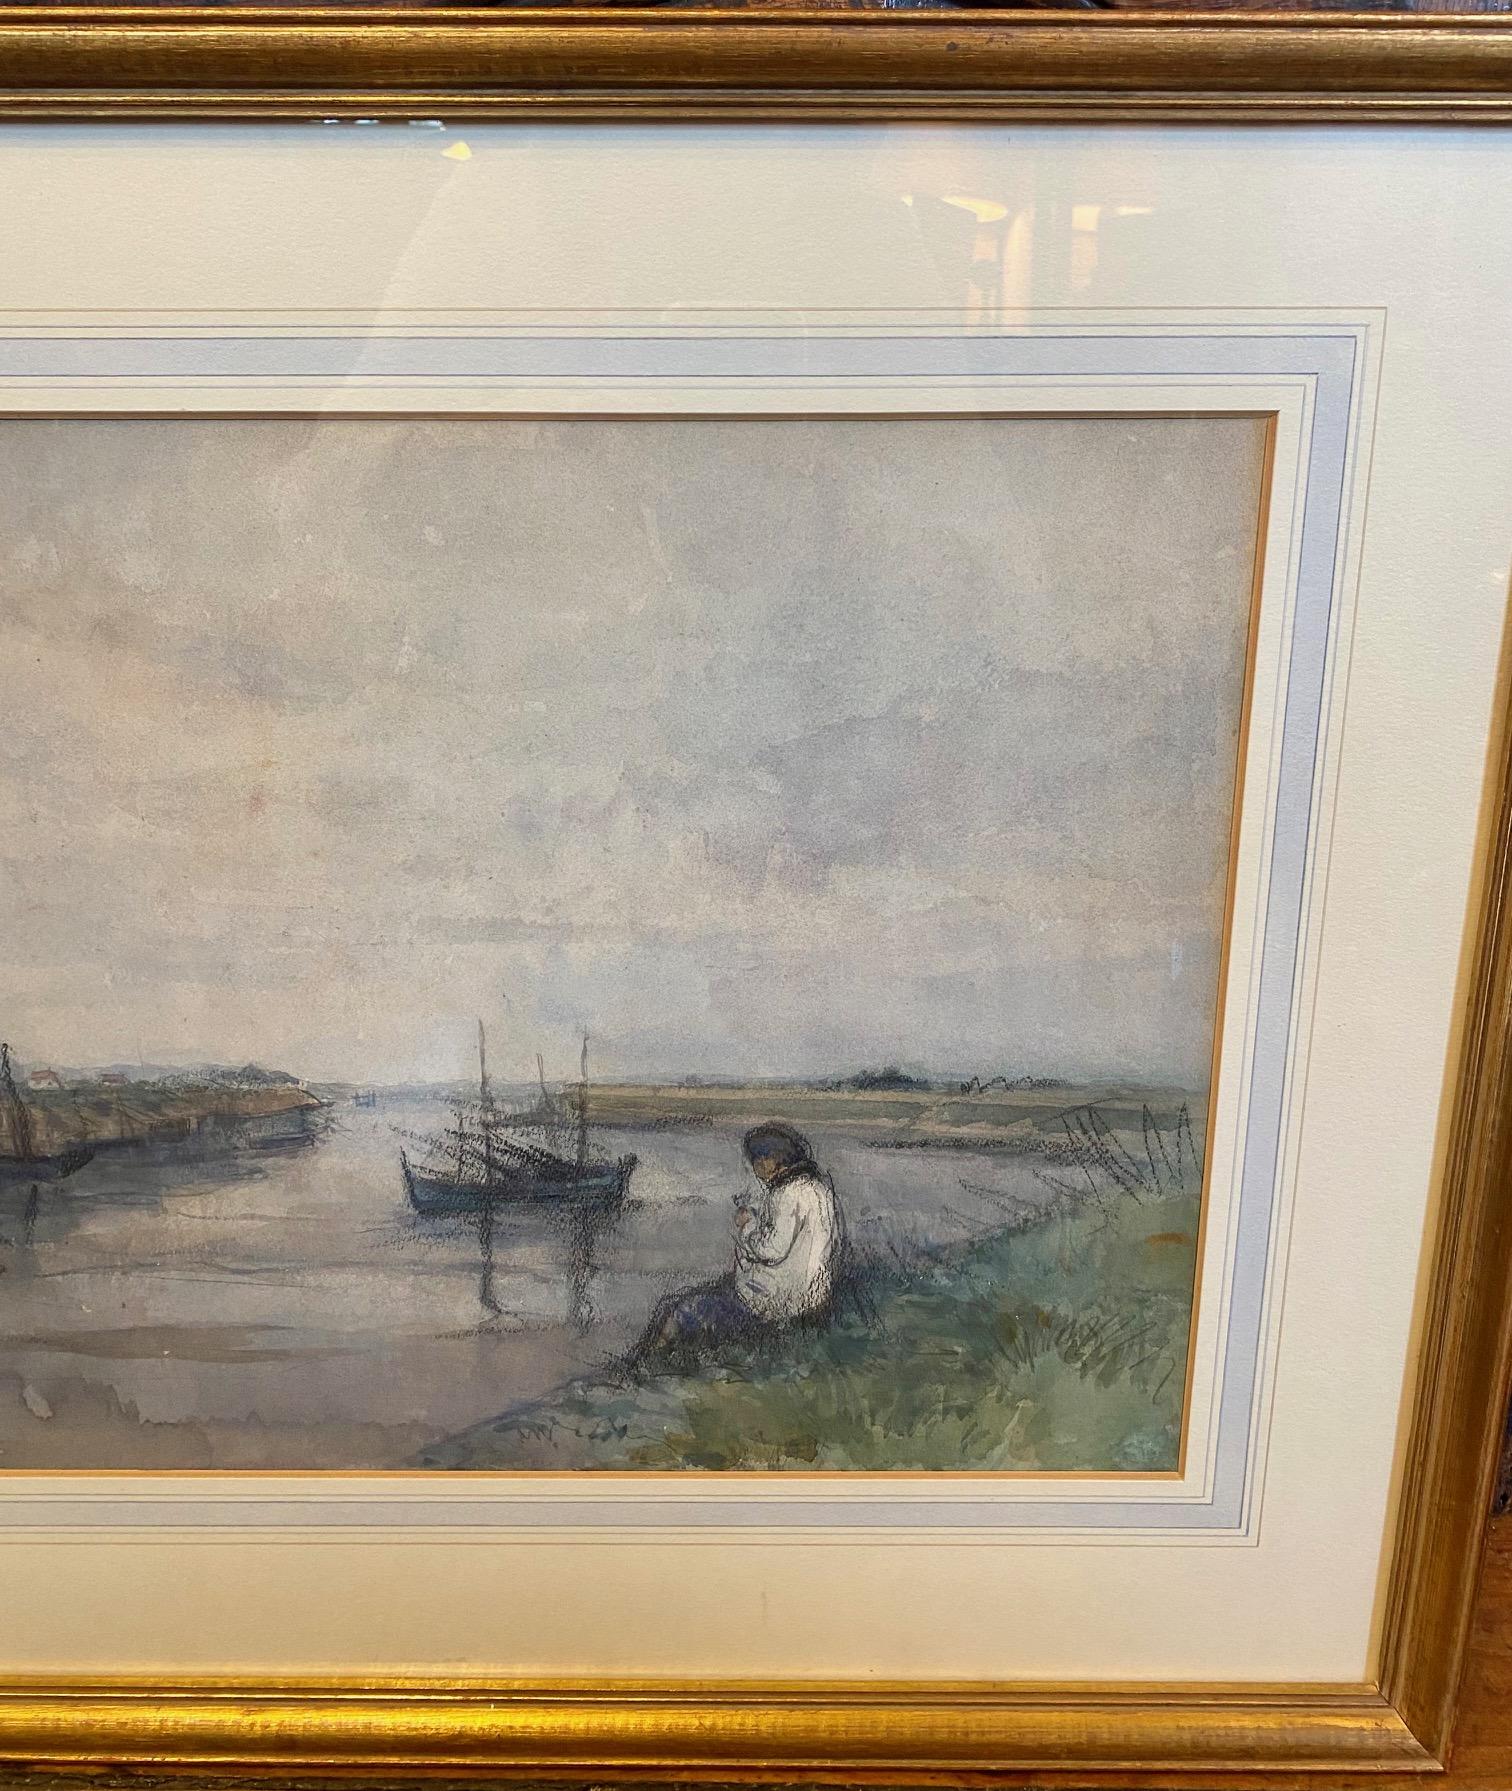 Impressionist Watercolor Shore Scene by Ferdinand Leys (Belgian: 1873 -1960), circa 1920, a hand painted original watercolor on paper impressionist view of a figure seated on the salt marsh bank of an inlet, with fishing boats moored along pier on